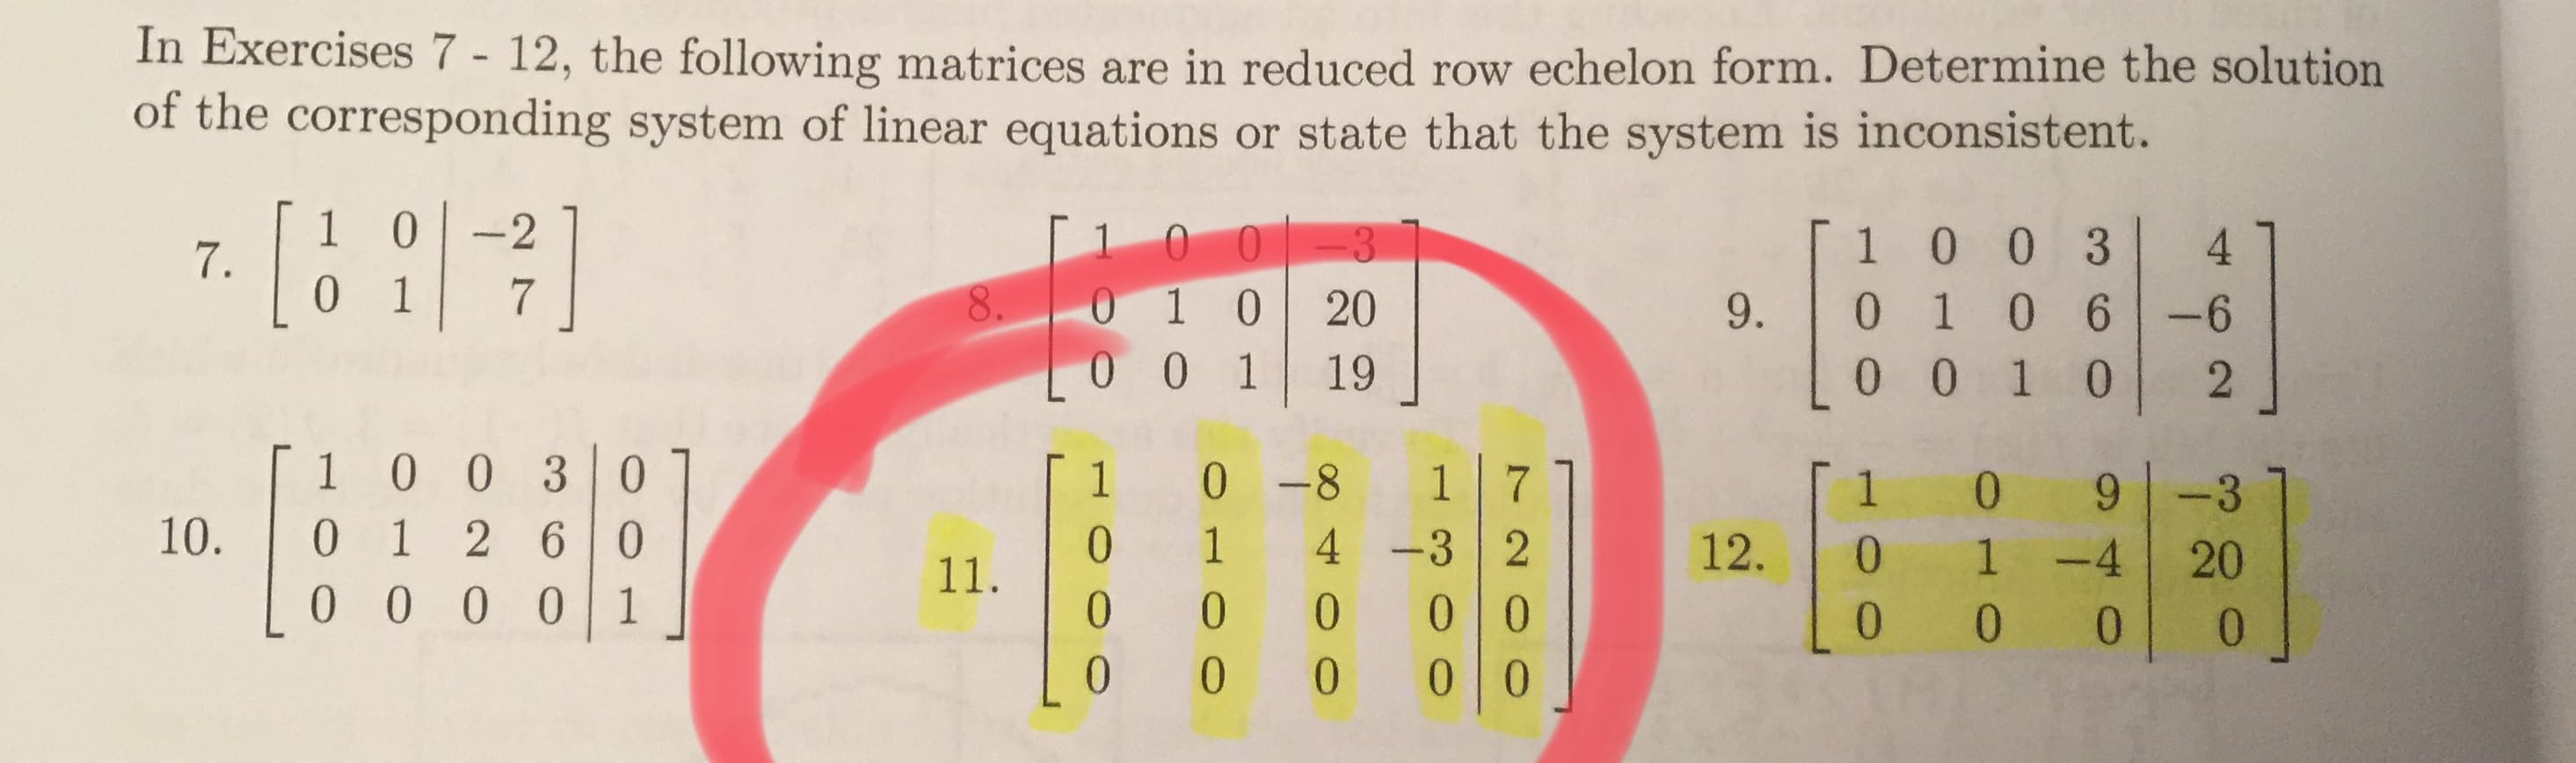 In Exercises 7- 12, the following matrices are in reduced row echelon form. Determine the solution
of the corresponding system of linear equations or state that the system is inconsistent.
1
7.
0
0
-2
0
O-3
1 0 0 3
4
1
7
O 1
0 0
8
0
20
0 1 0 6
9.
-6
1
19
0 0 1 0
2
1 0 0 3 0
2 6 0
1 0 -8
1
1
0
-3
10.
0 1
4
-3 2
12.
1 -4
20
11.
0 0 0 0
1
0
0
0
0 0 0
0
0
0
0
7200
OHOO
O0O
